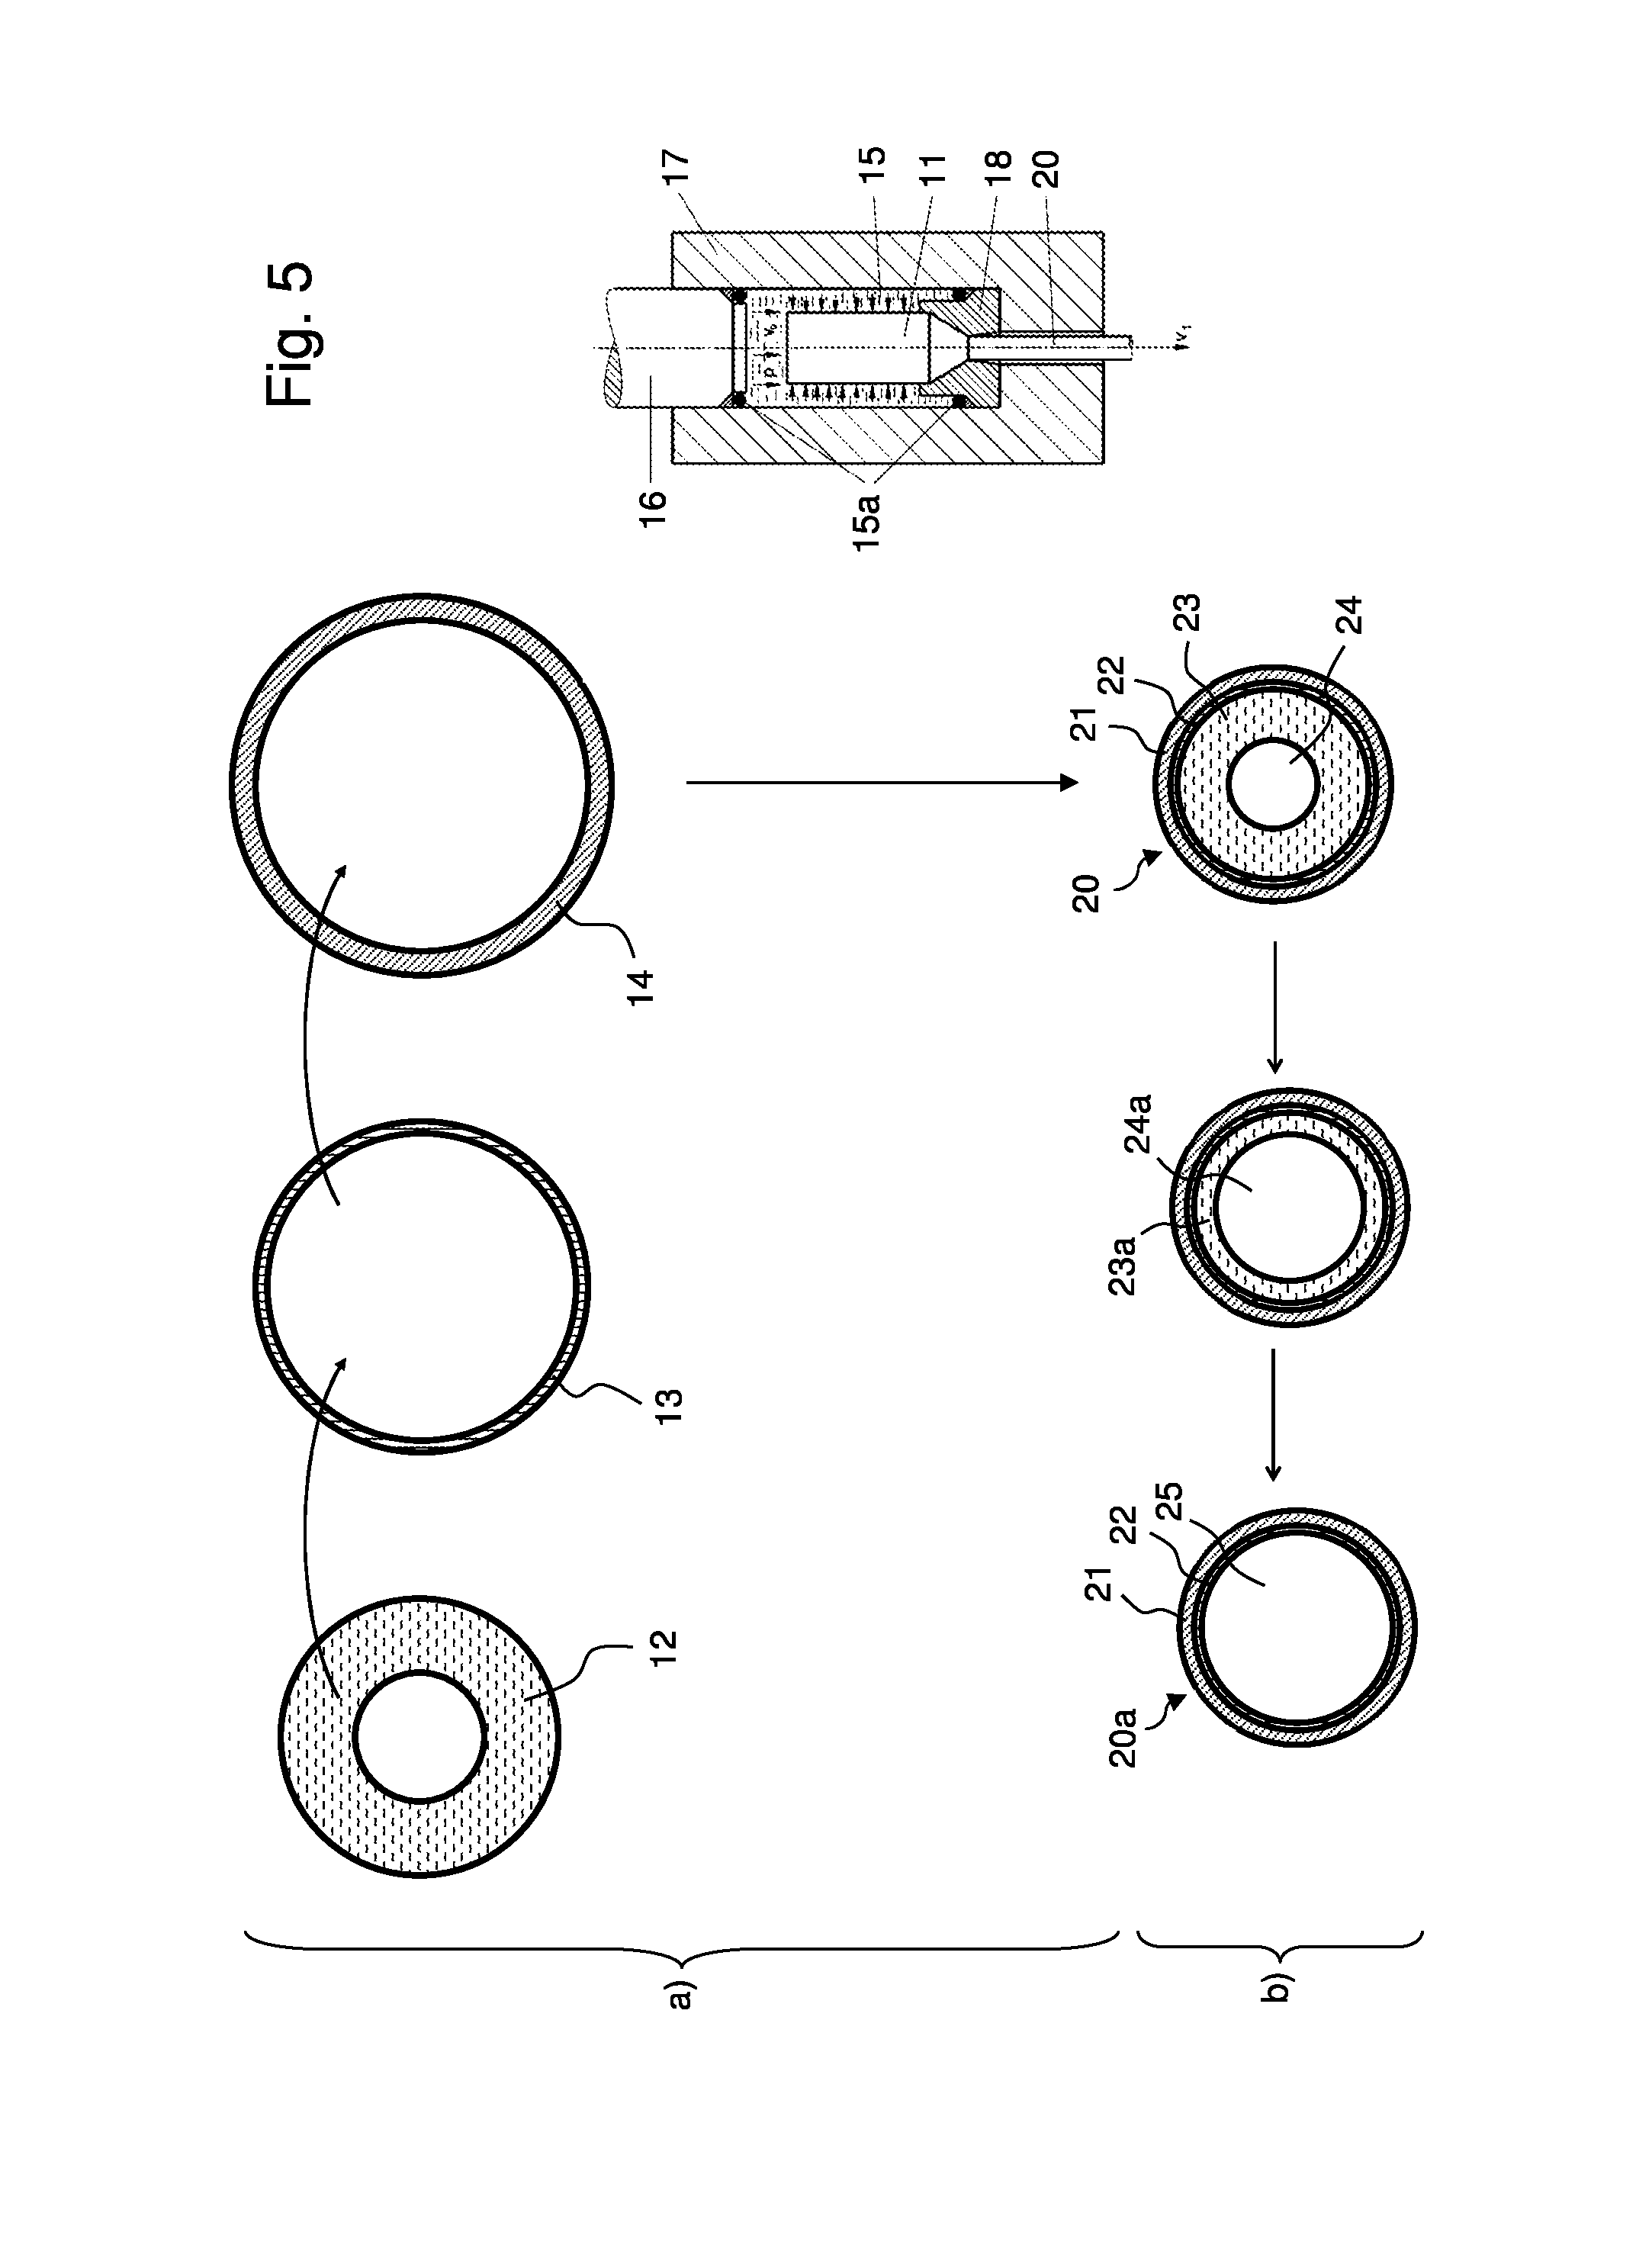 Semifinished wire with PIT elements for a superconducting wire containing Nb3Sn and method of producing the semifinished wire